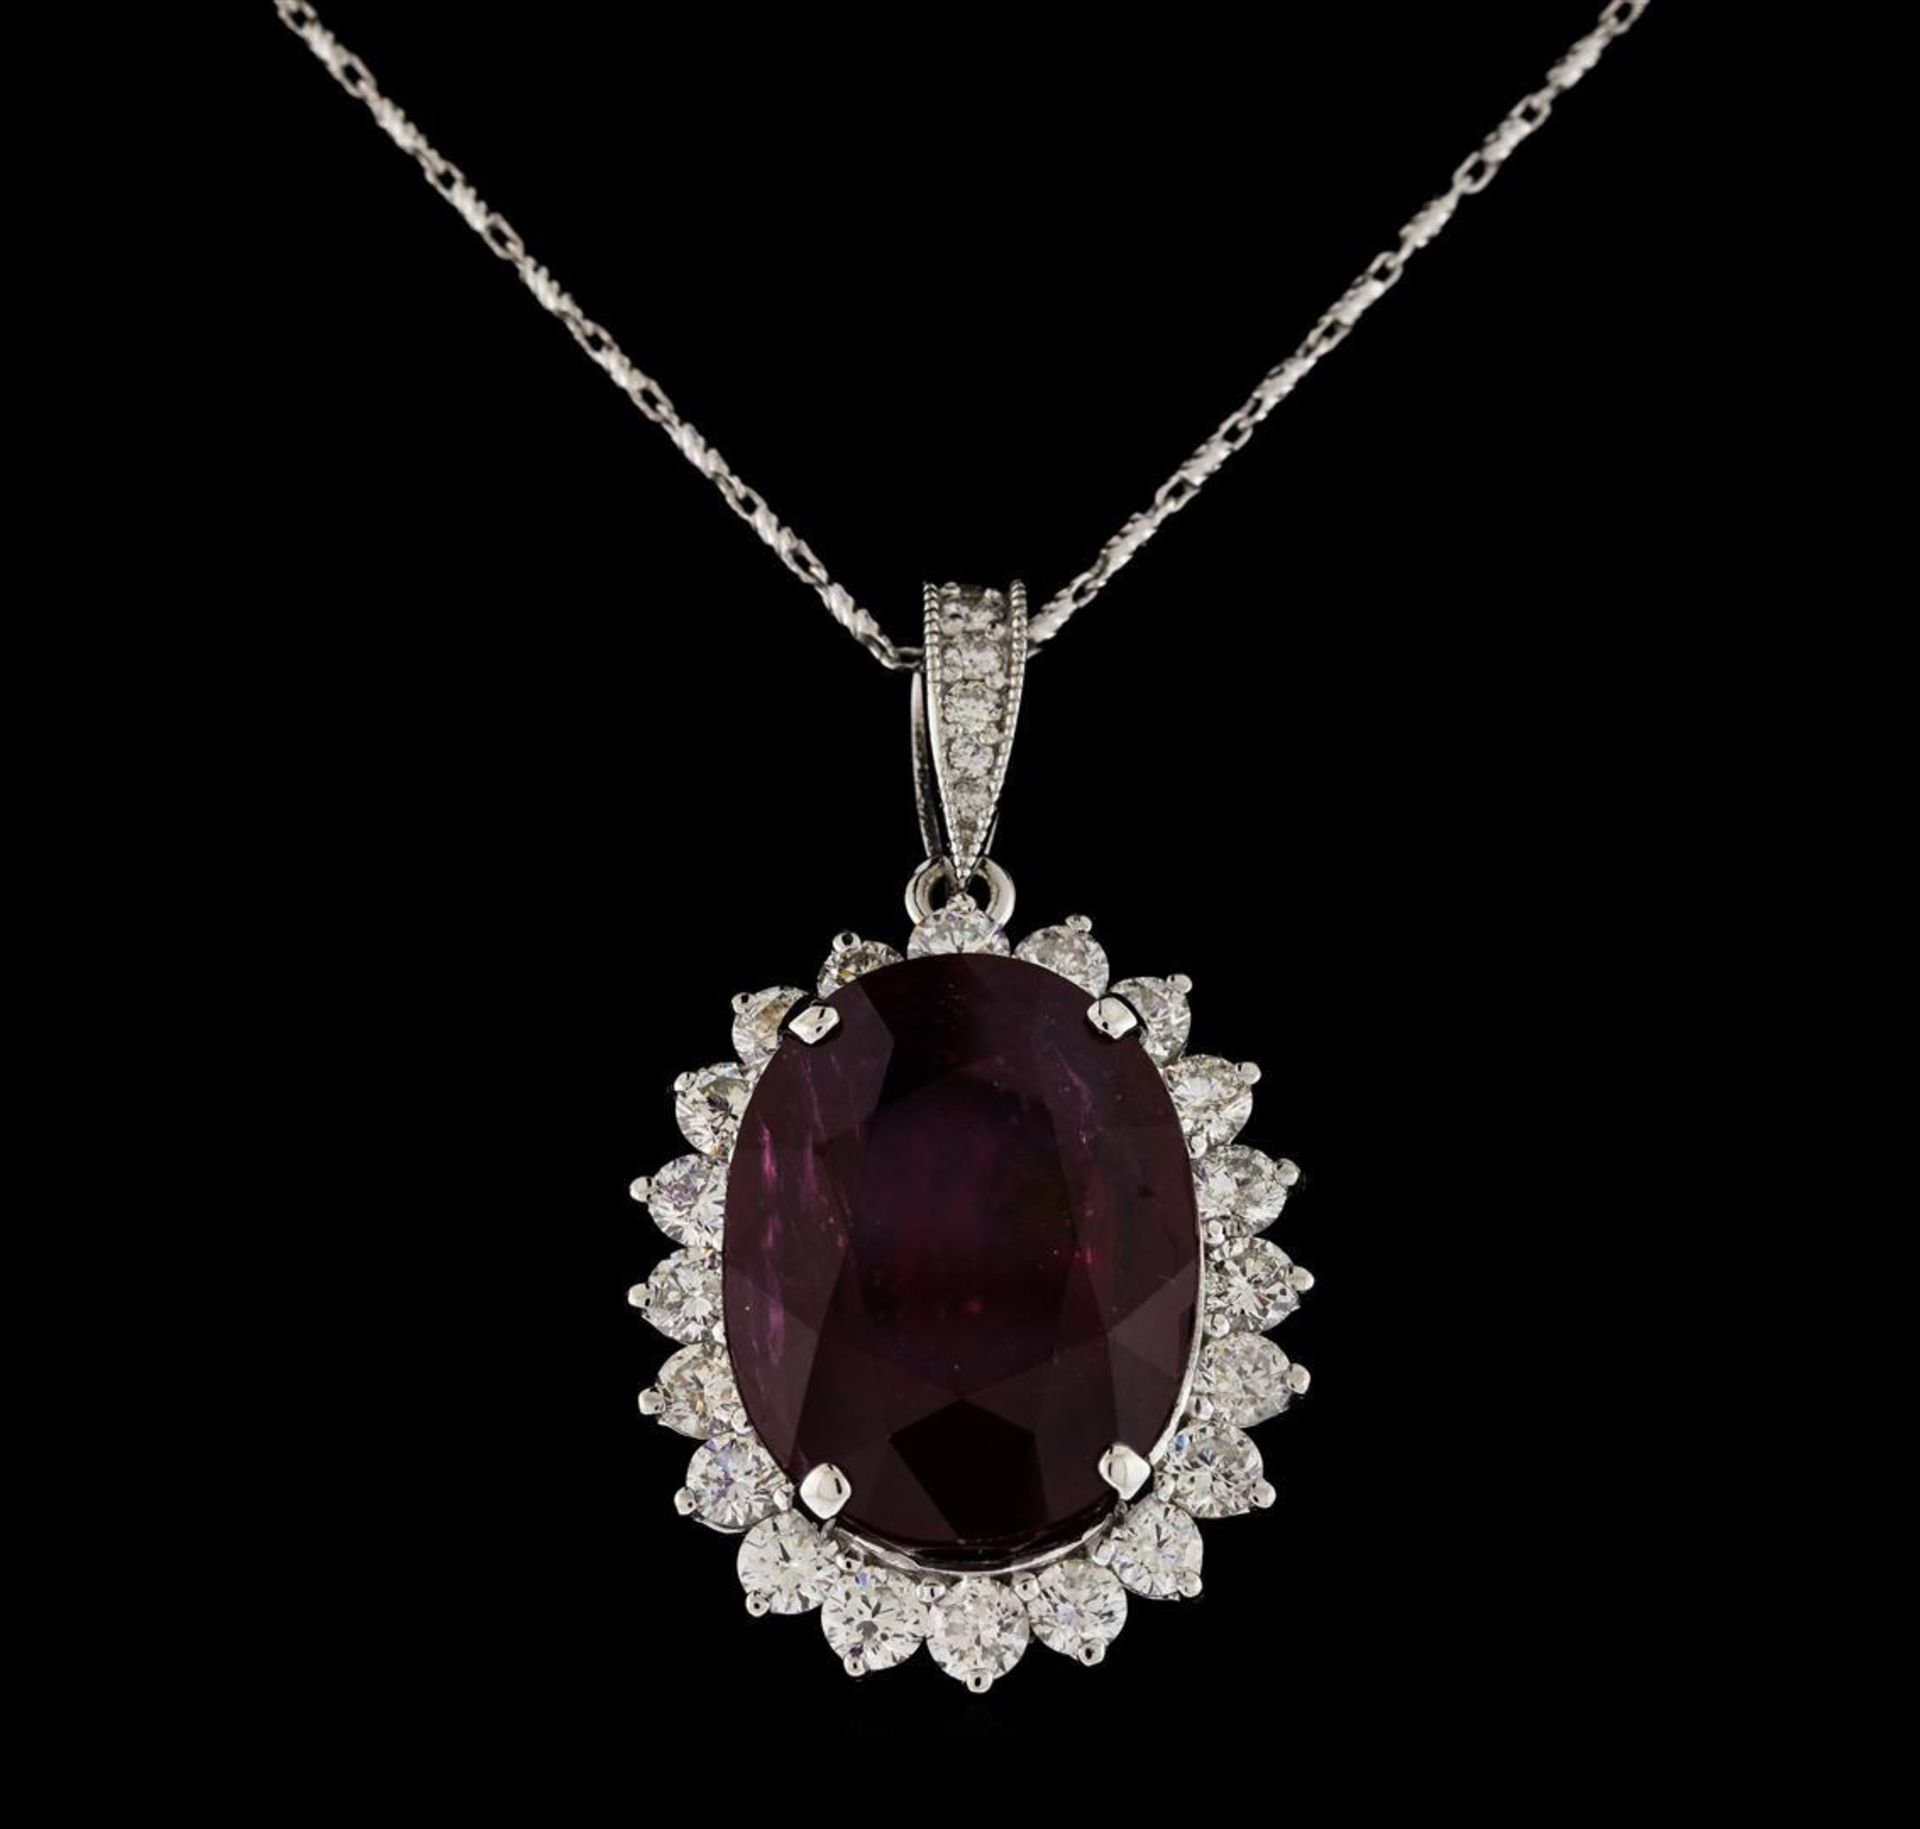 18.81 ctw Ruby and Diamond Pendant With Chain - 14KT White Gold - Image 3 of 6